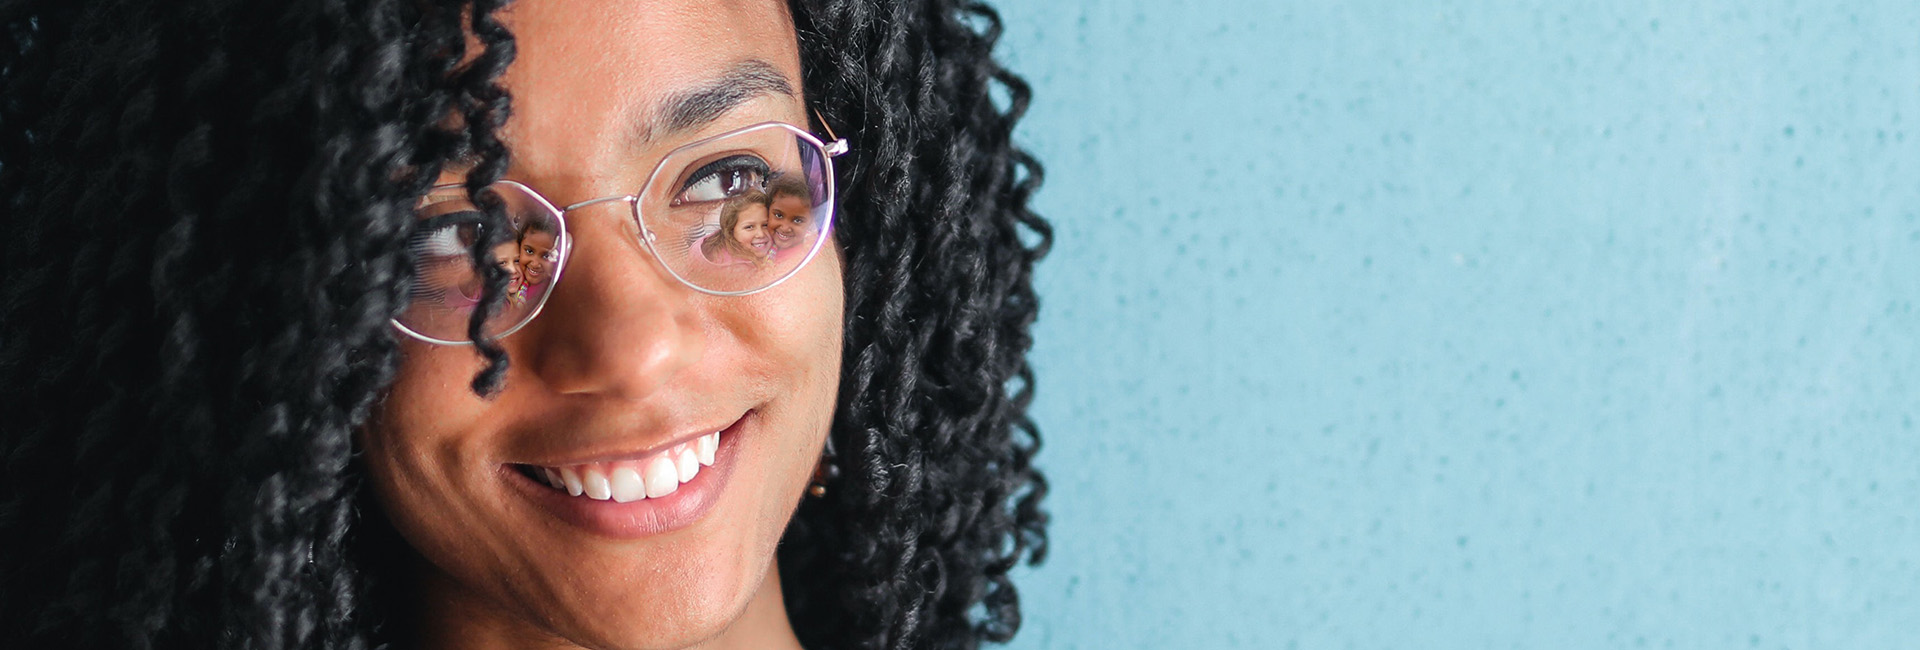 Smiling woman wearing glasses with children's reflections